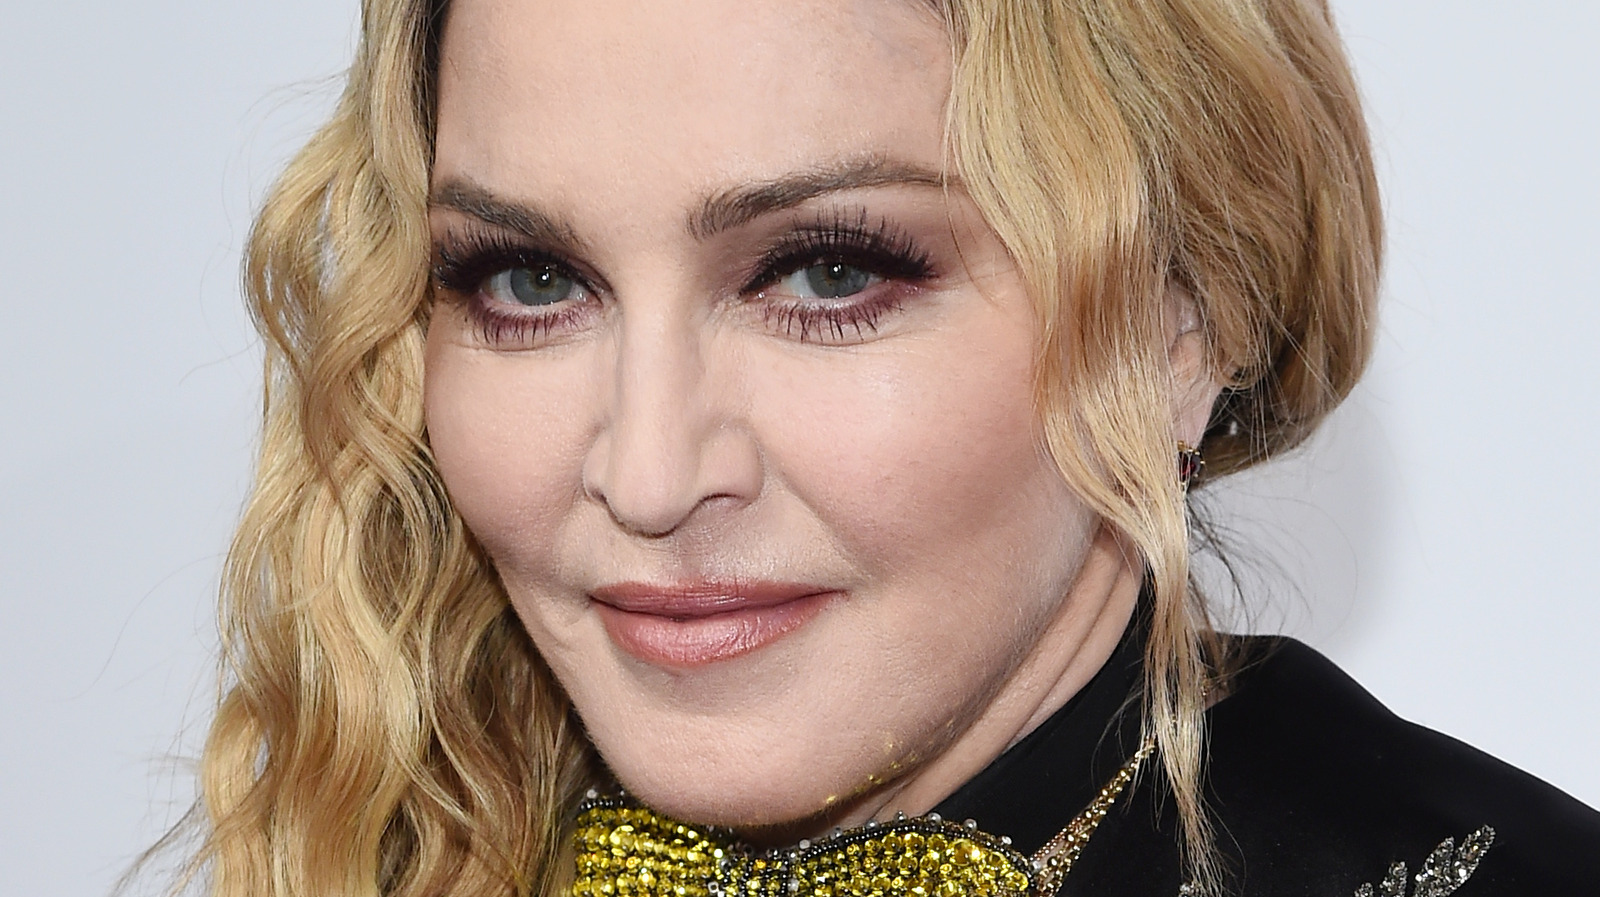 The Real Reason Madonna And Guy Ritchie Got Divorced